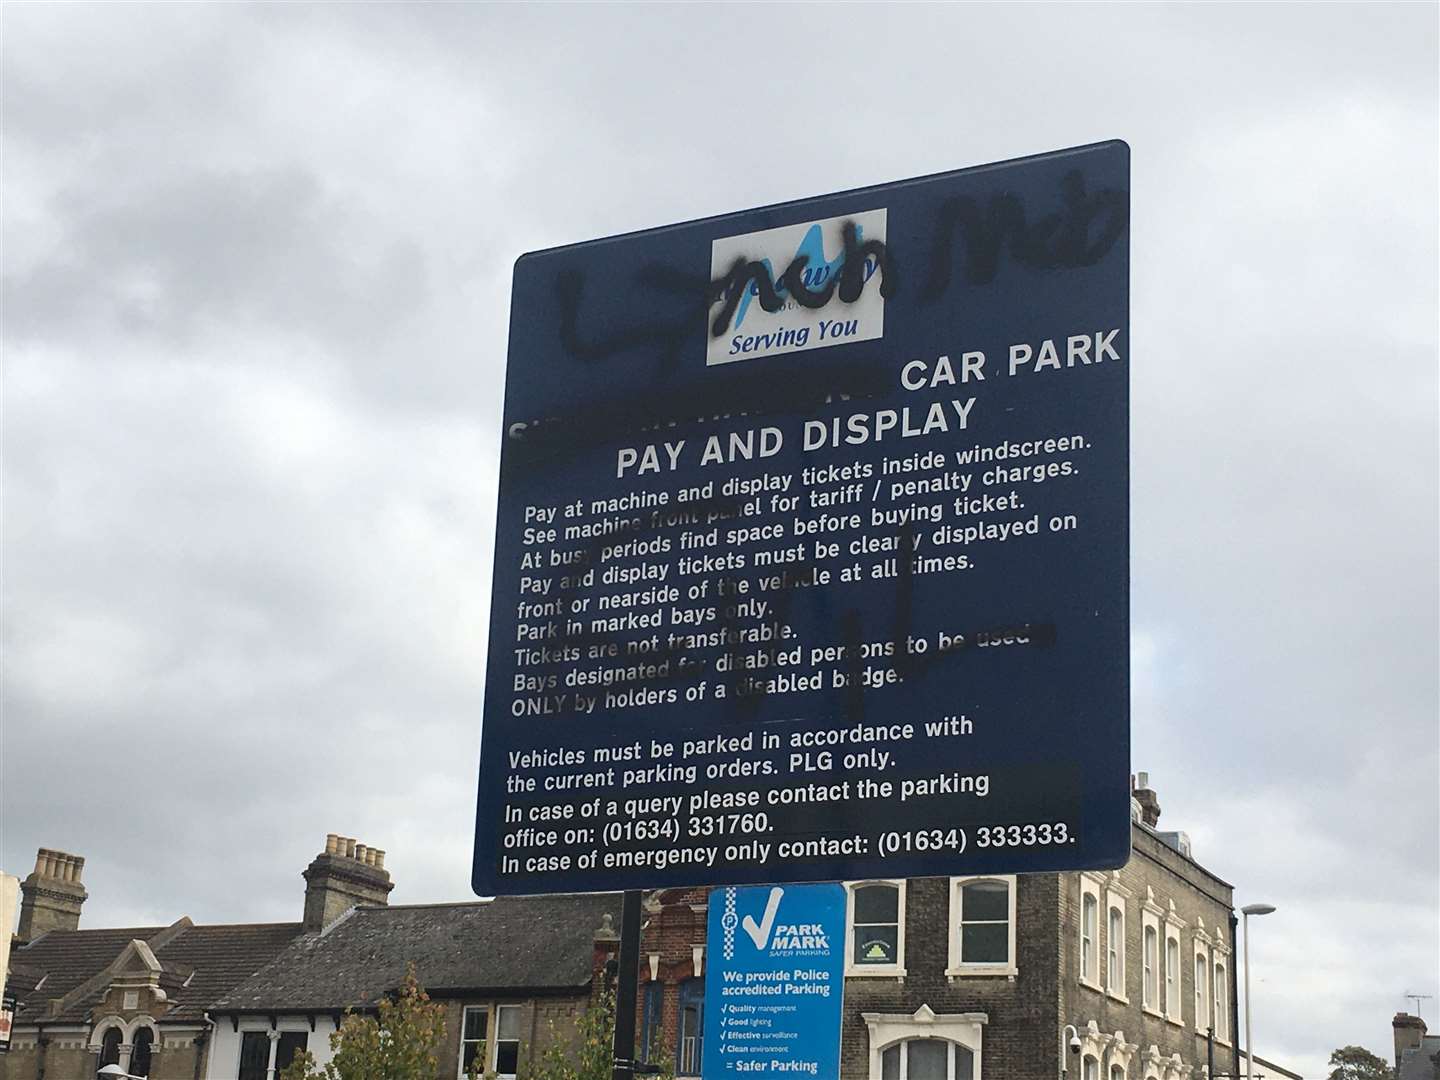 The Sir John Hawkins car park signs in Chatham have been scrawled with graffiti in reference to comments made by council leader Alan Jarrett earlier this year